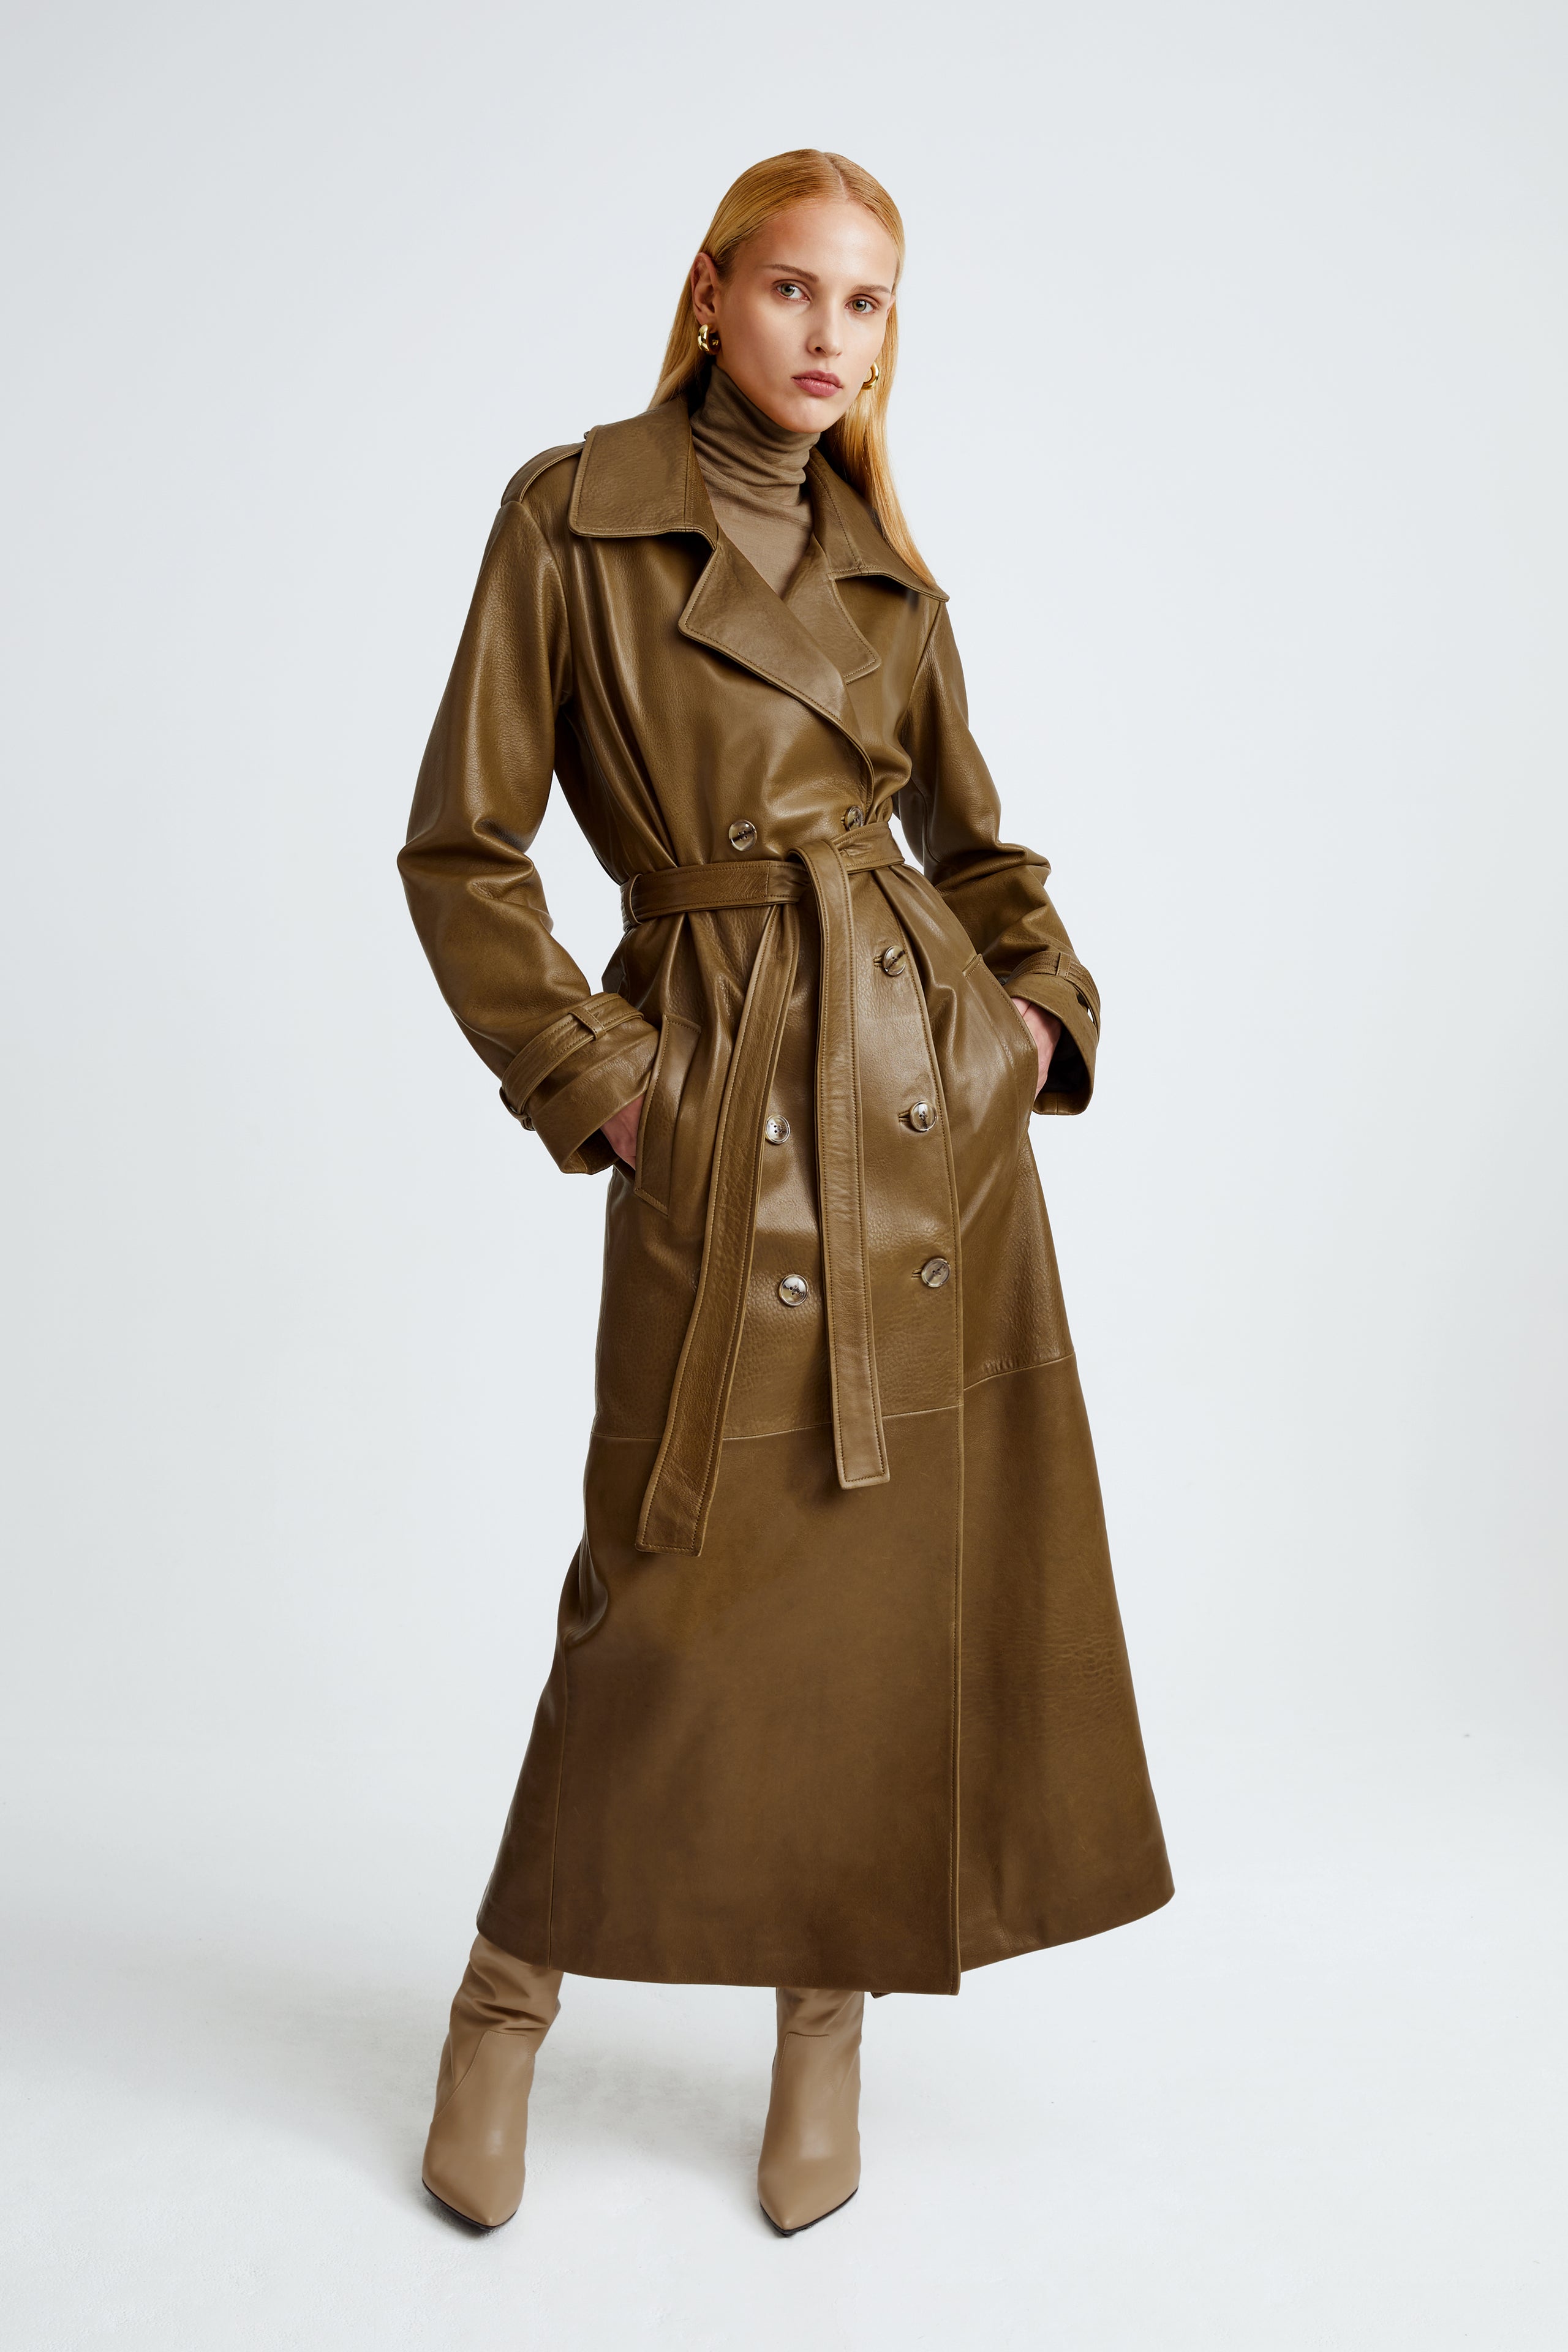 Model is wearing the Haya Zeytoun Belted Leather Trench Coat Front